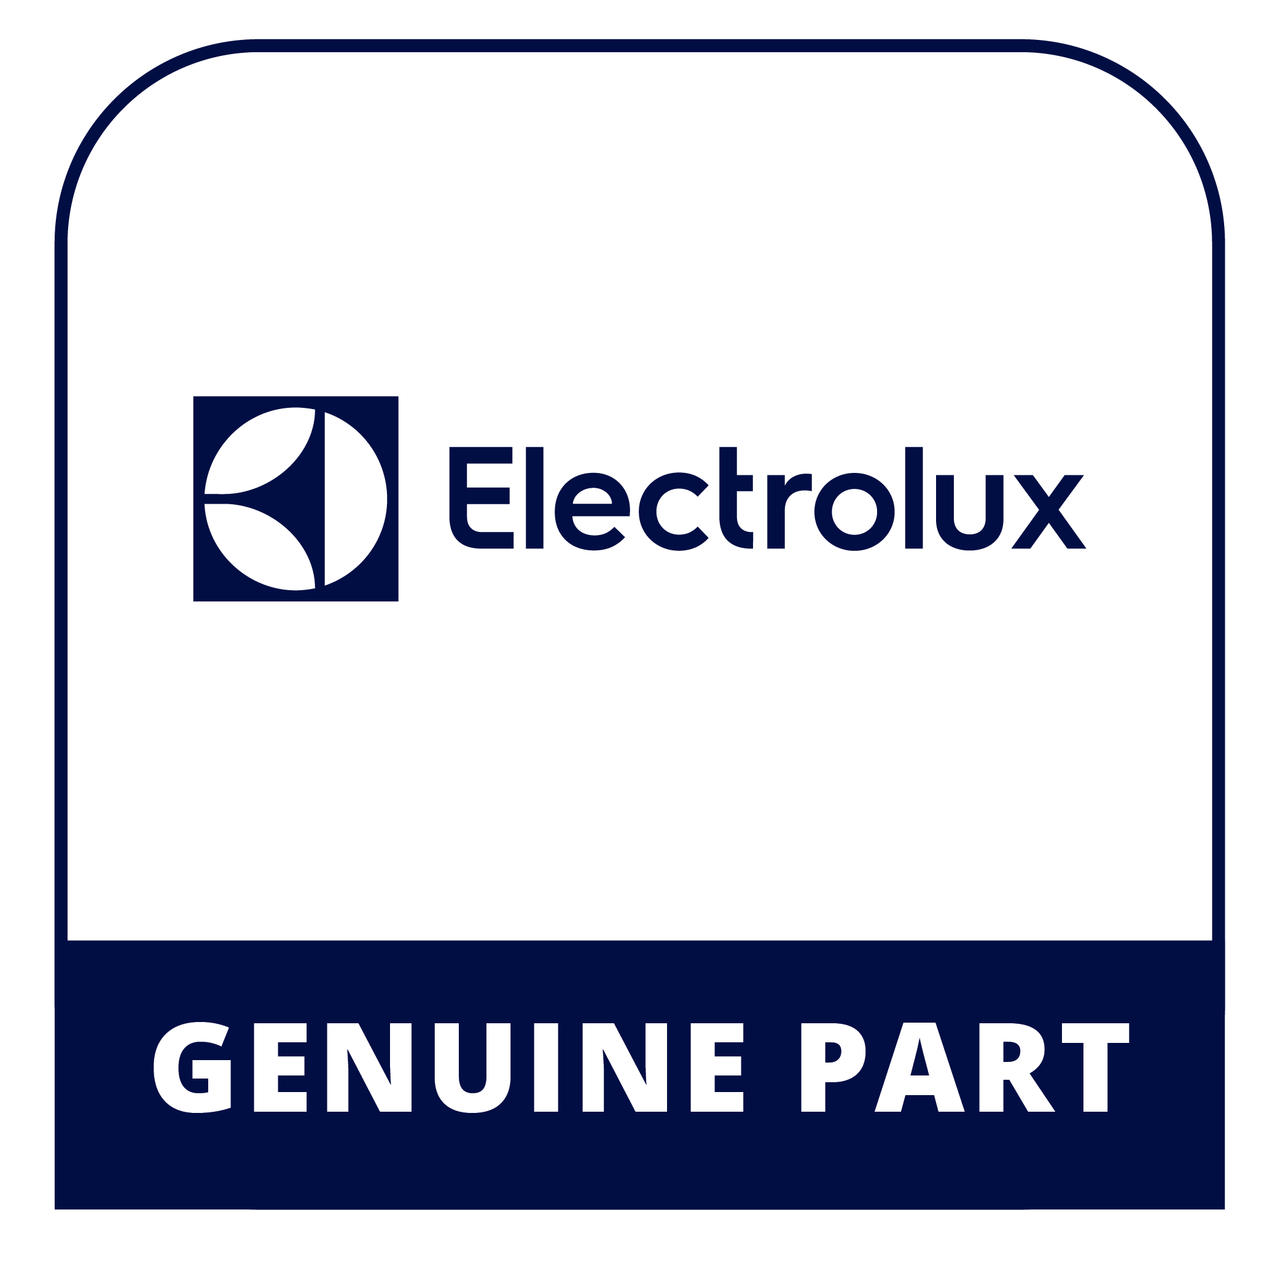 Frigidaire - Electrolux 134819500 Use & Care Guide - Genuine Electrolux Part